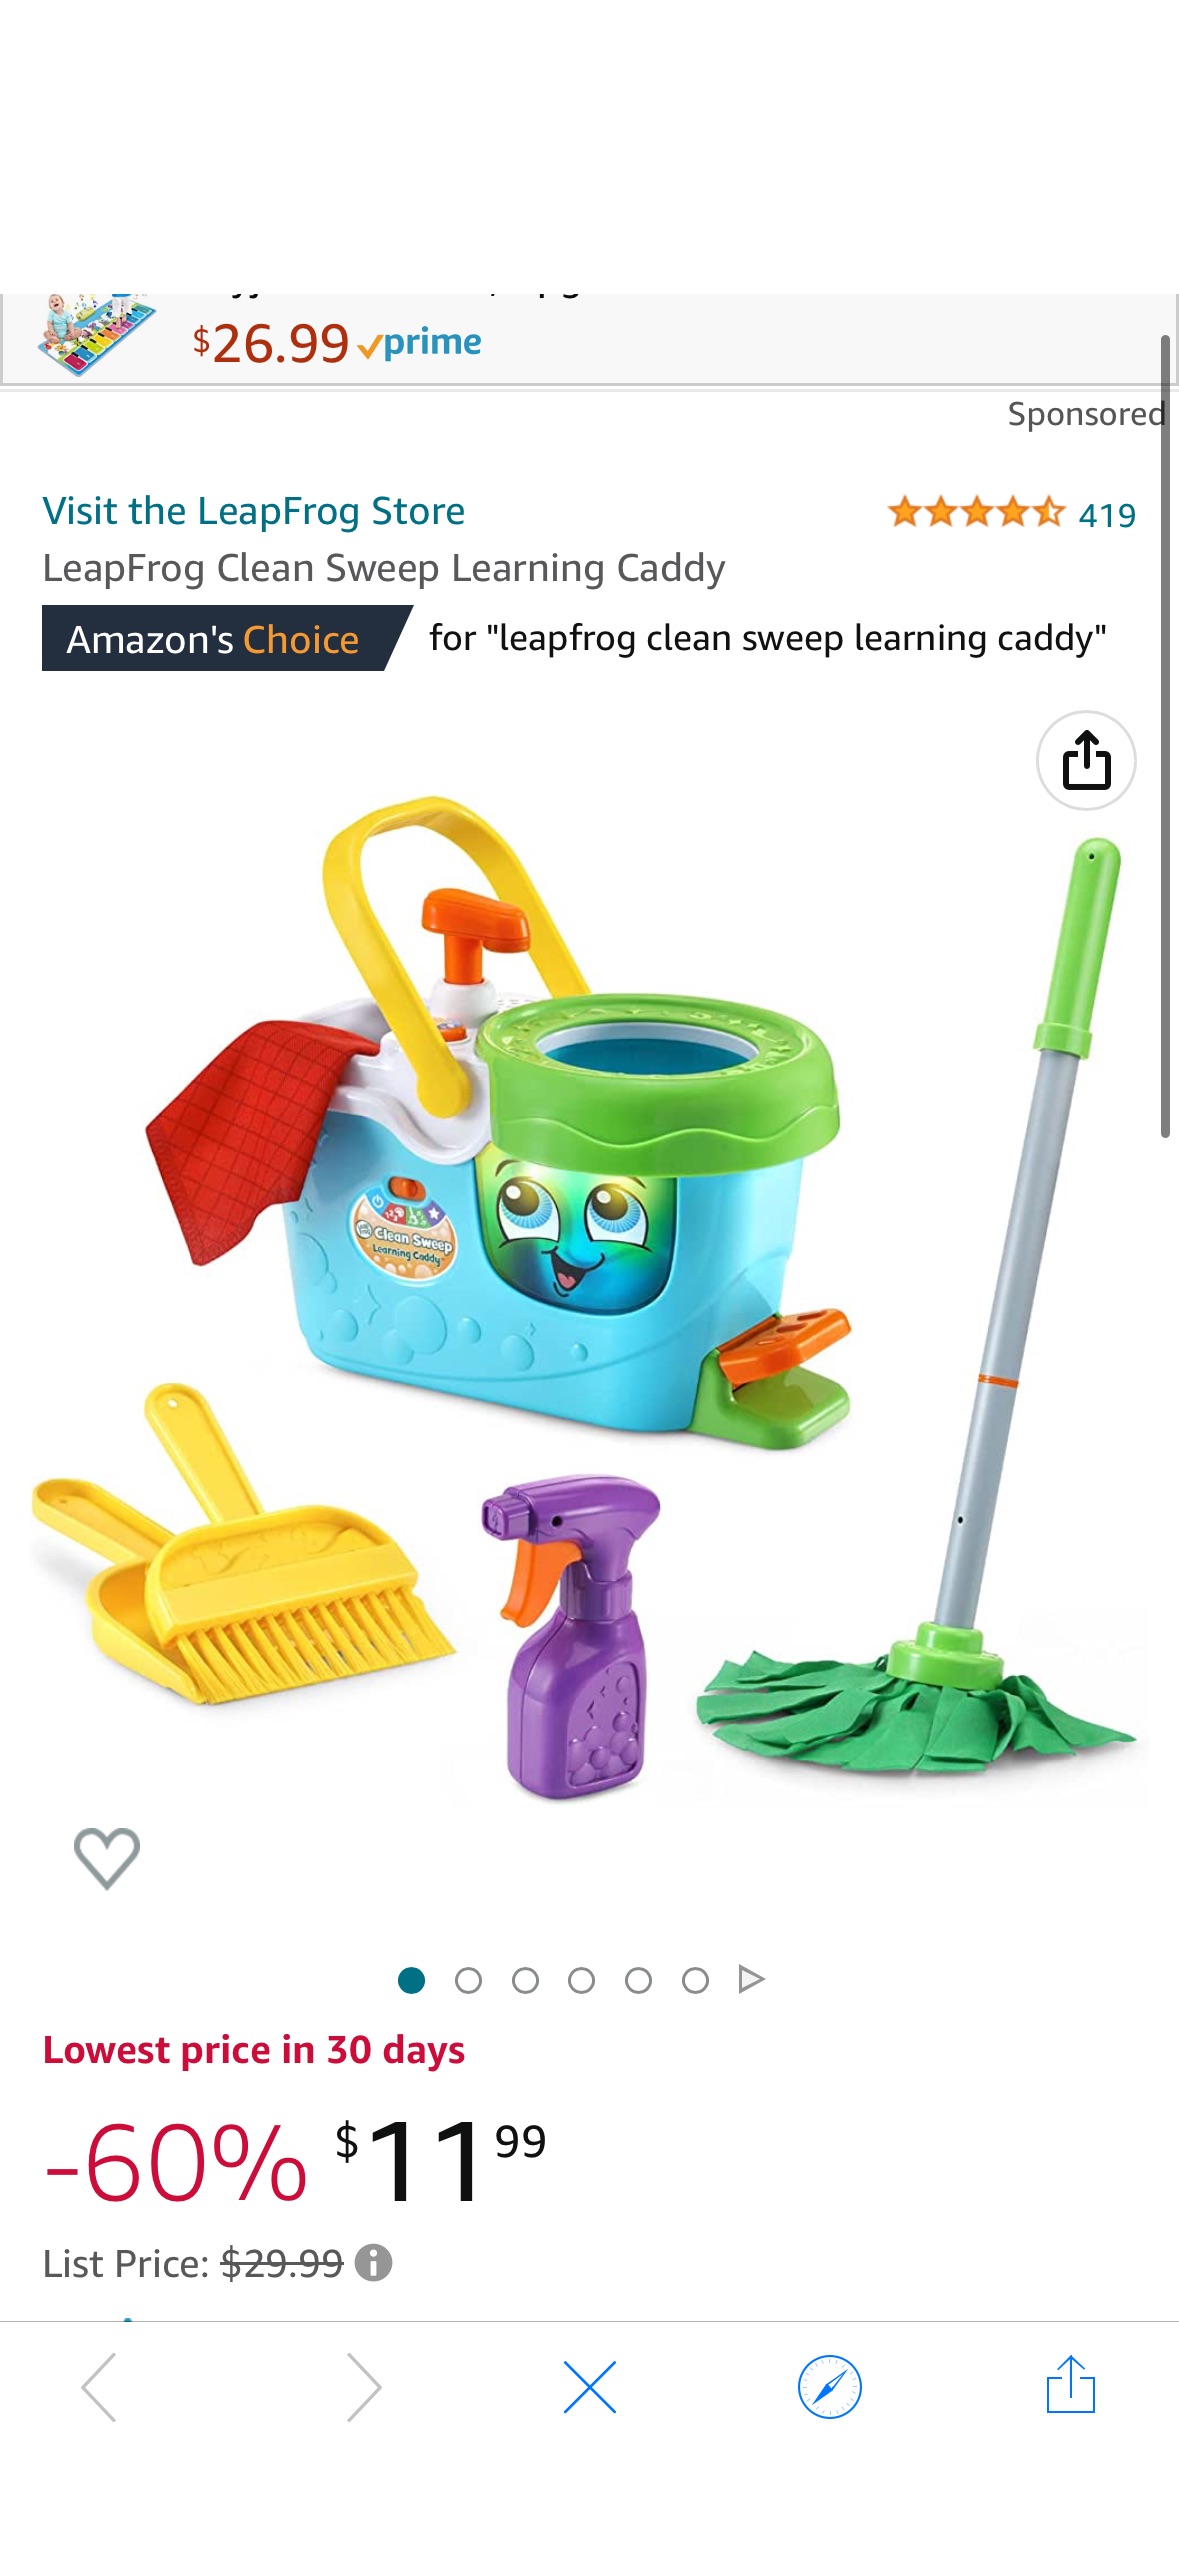 Amazon.com: LeapFrog Clean Sweep Learning Caddy : Toys & Games